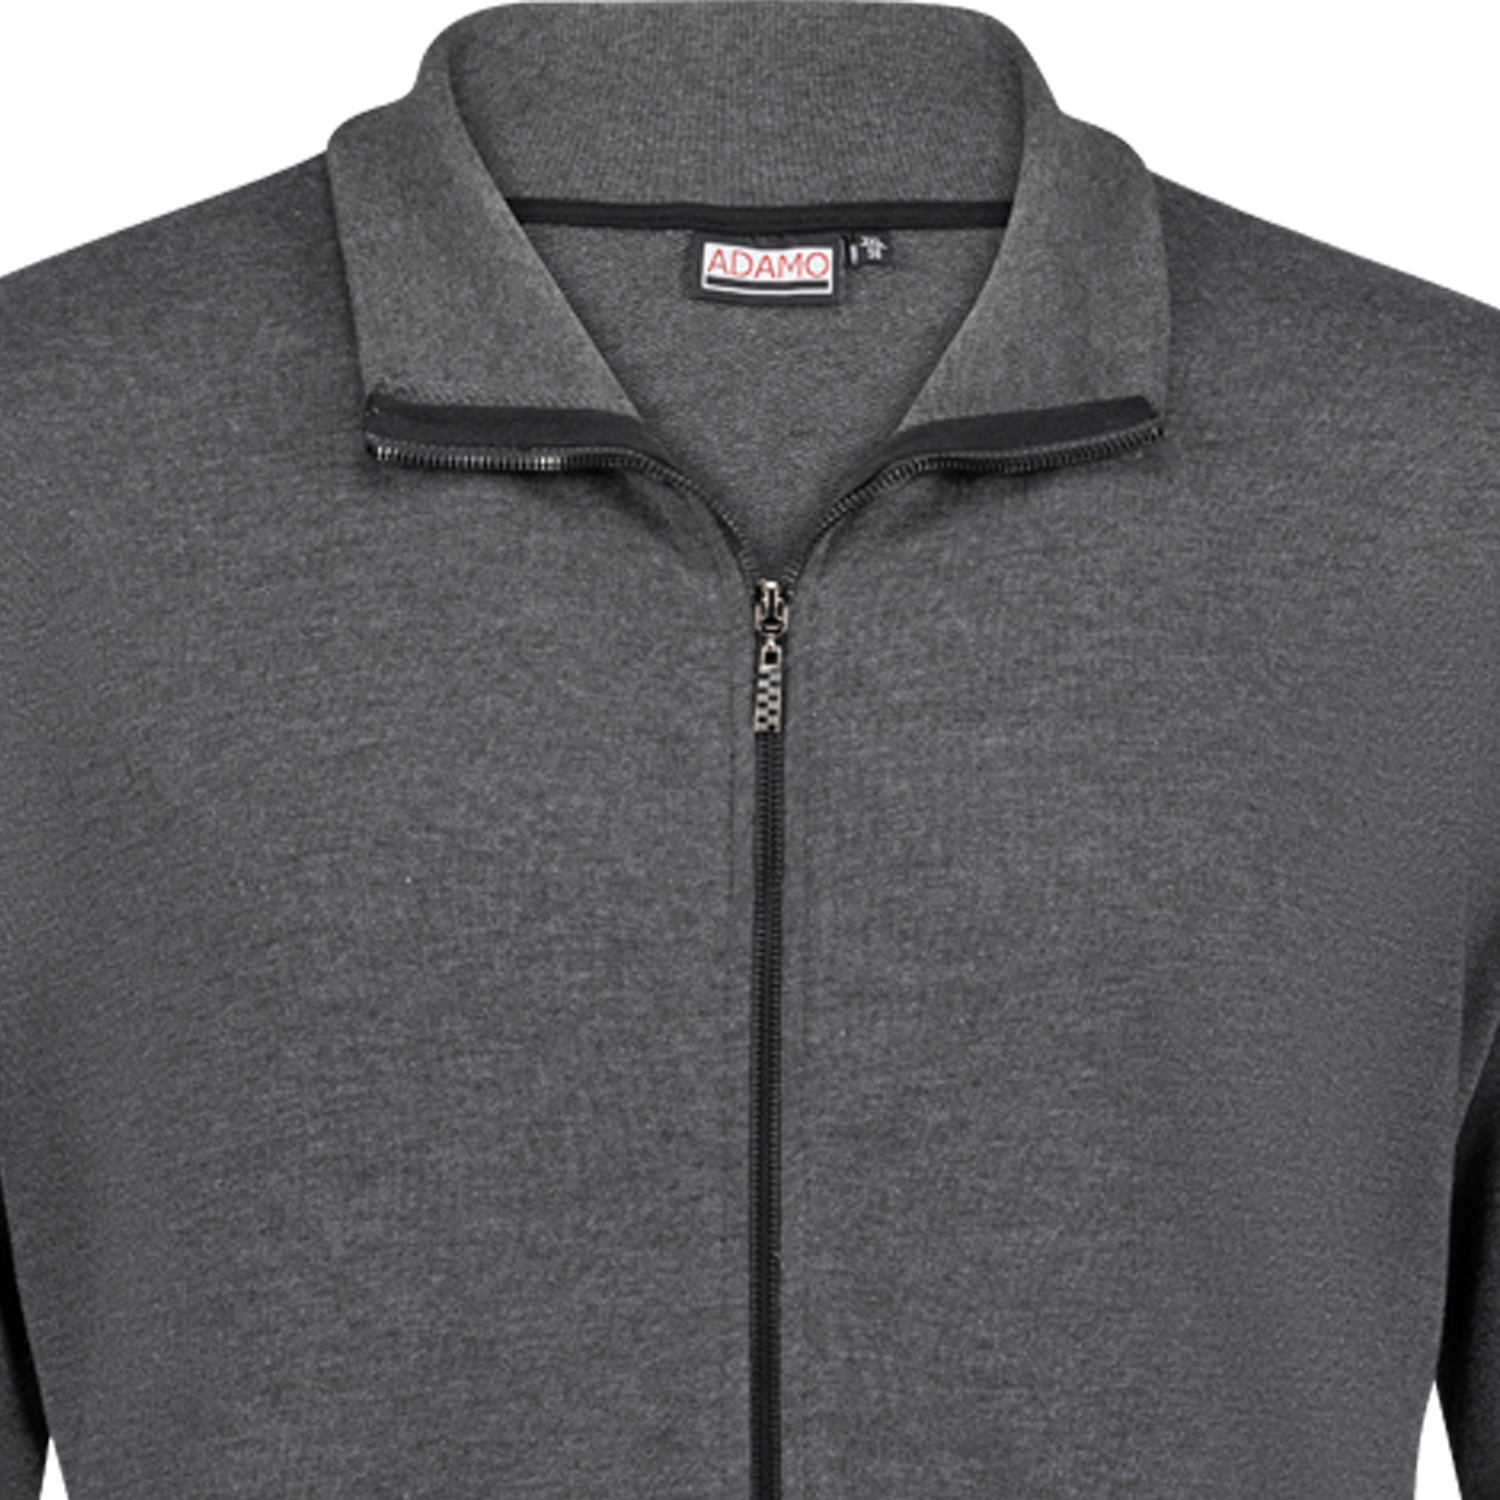 Sweatjacket ATHEN by Adamo in anthracite mottled in oversizes up to 14XL